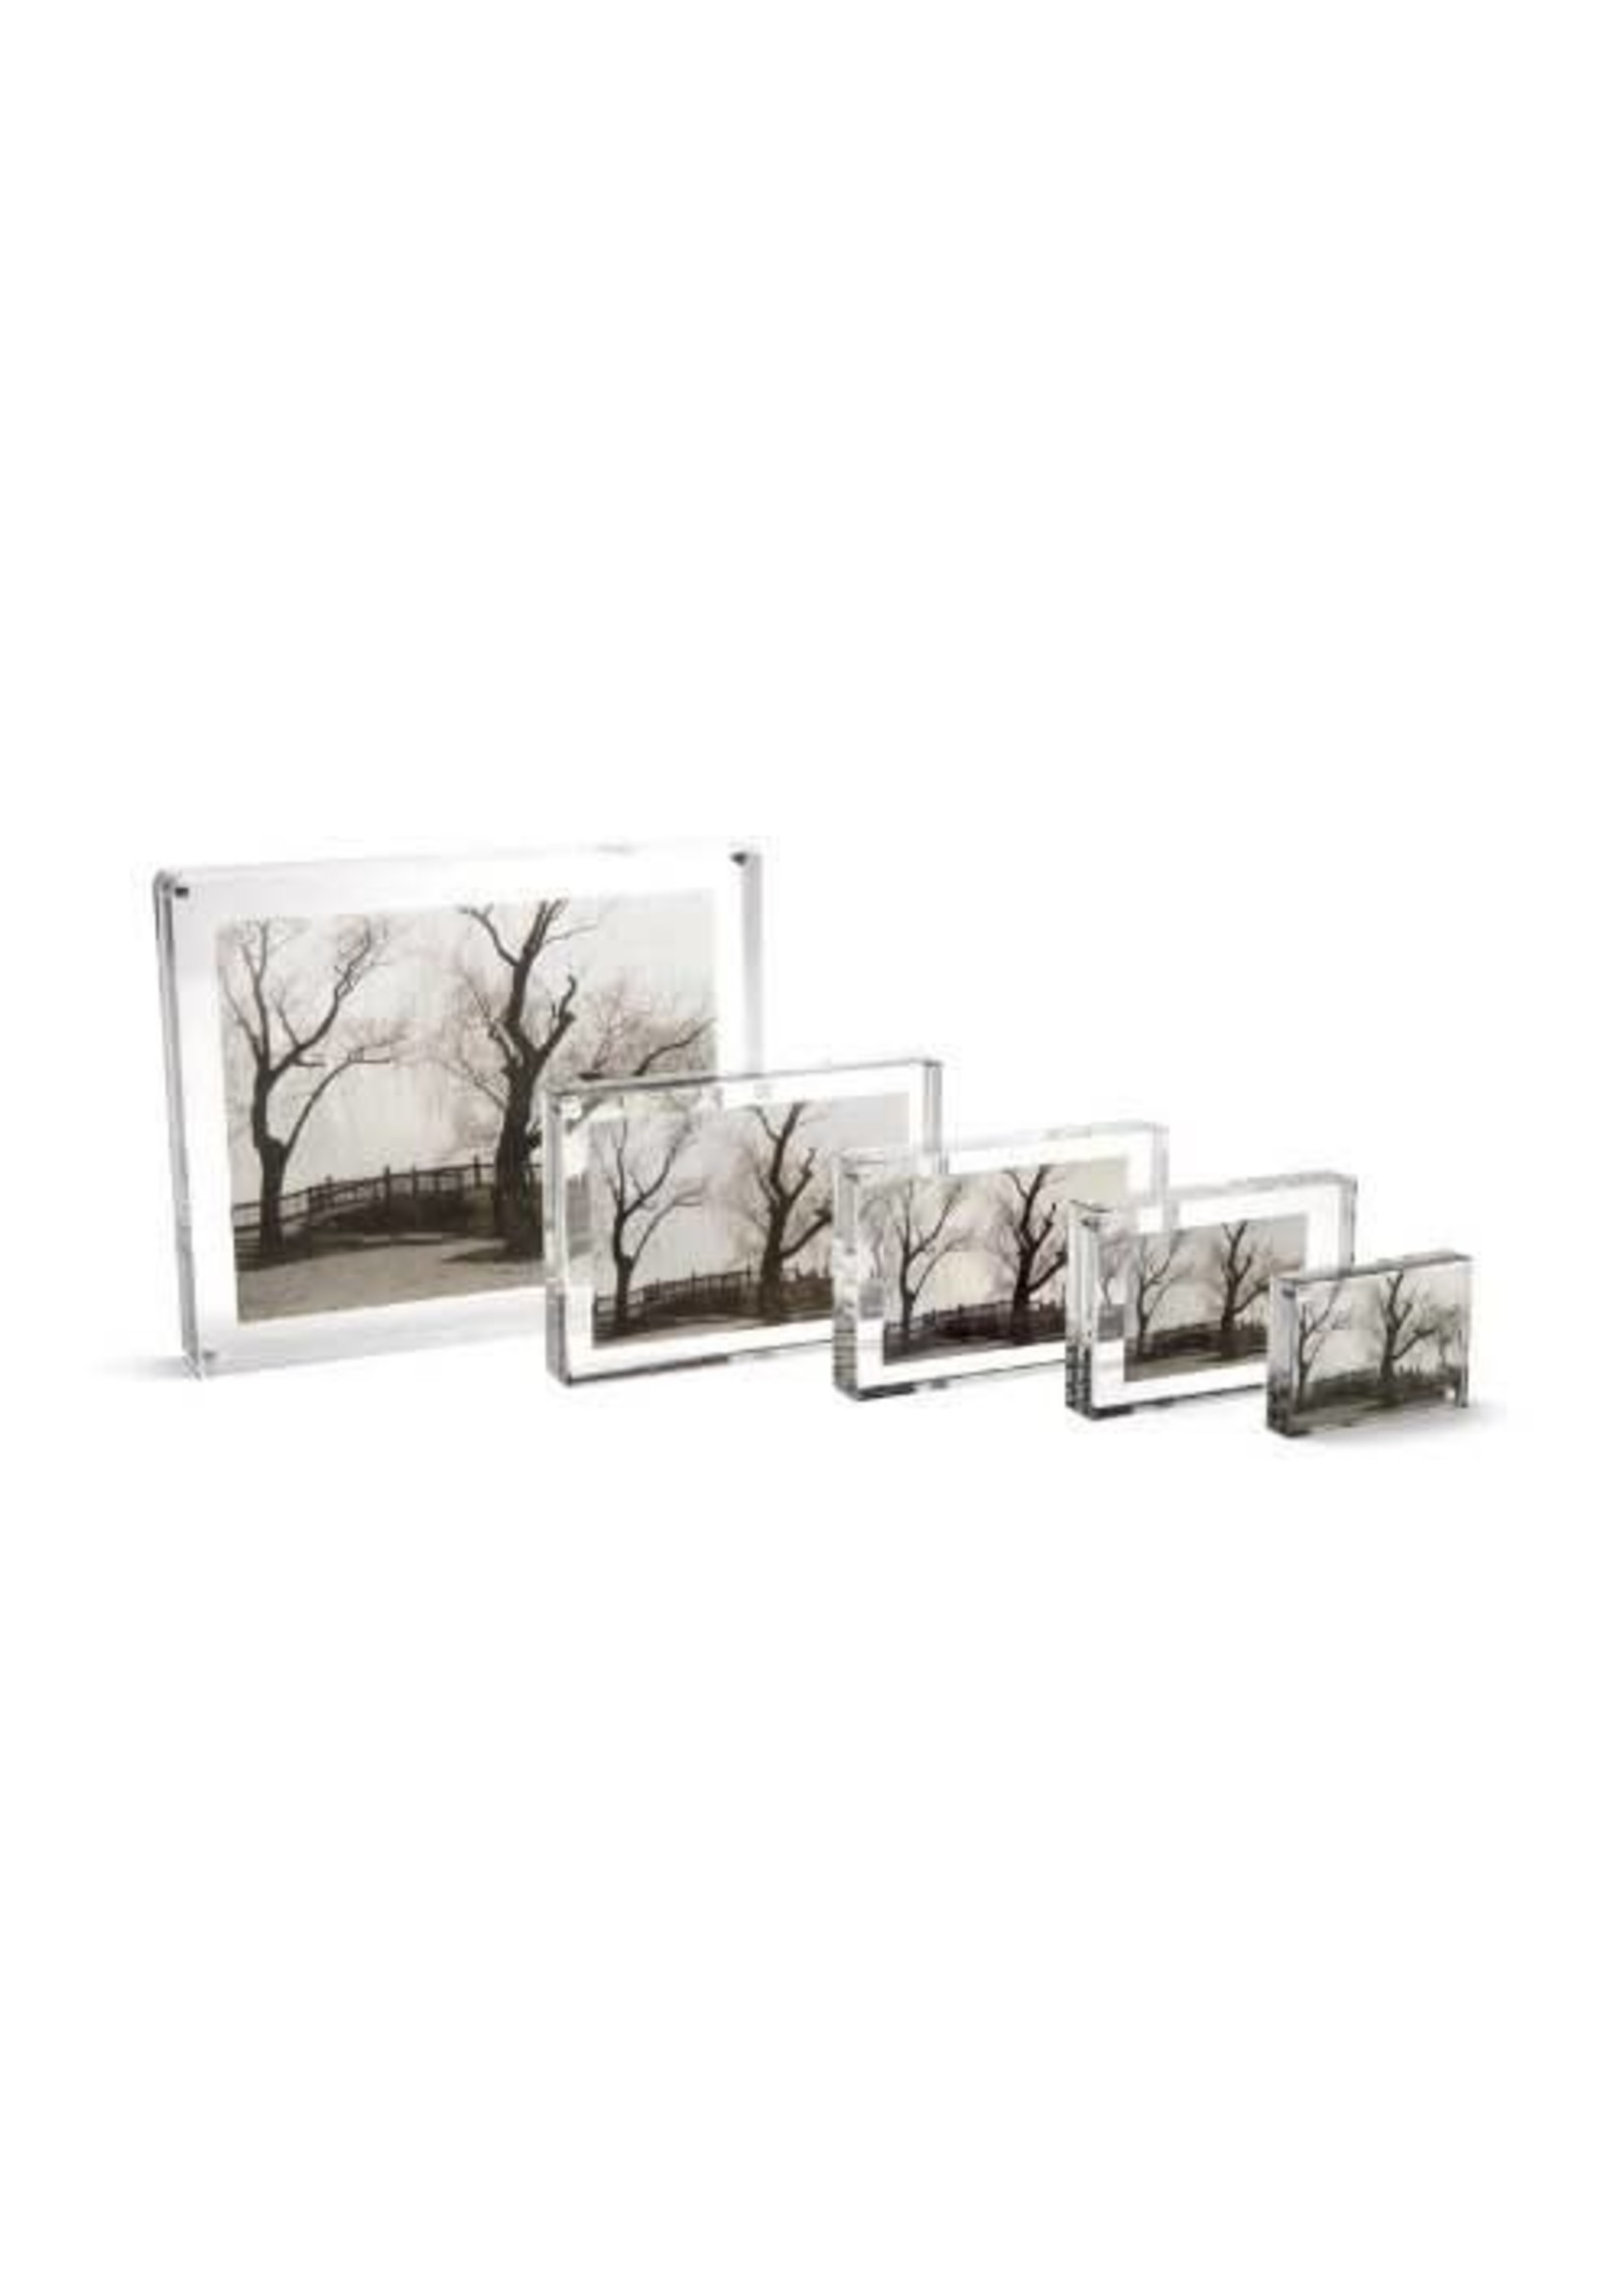 Canetti Design Group 4X4" CLEAR ORIGINAL MAGNET FRAME